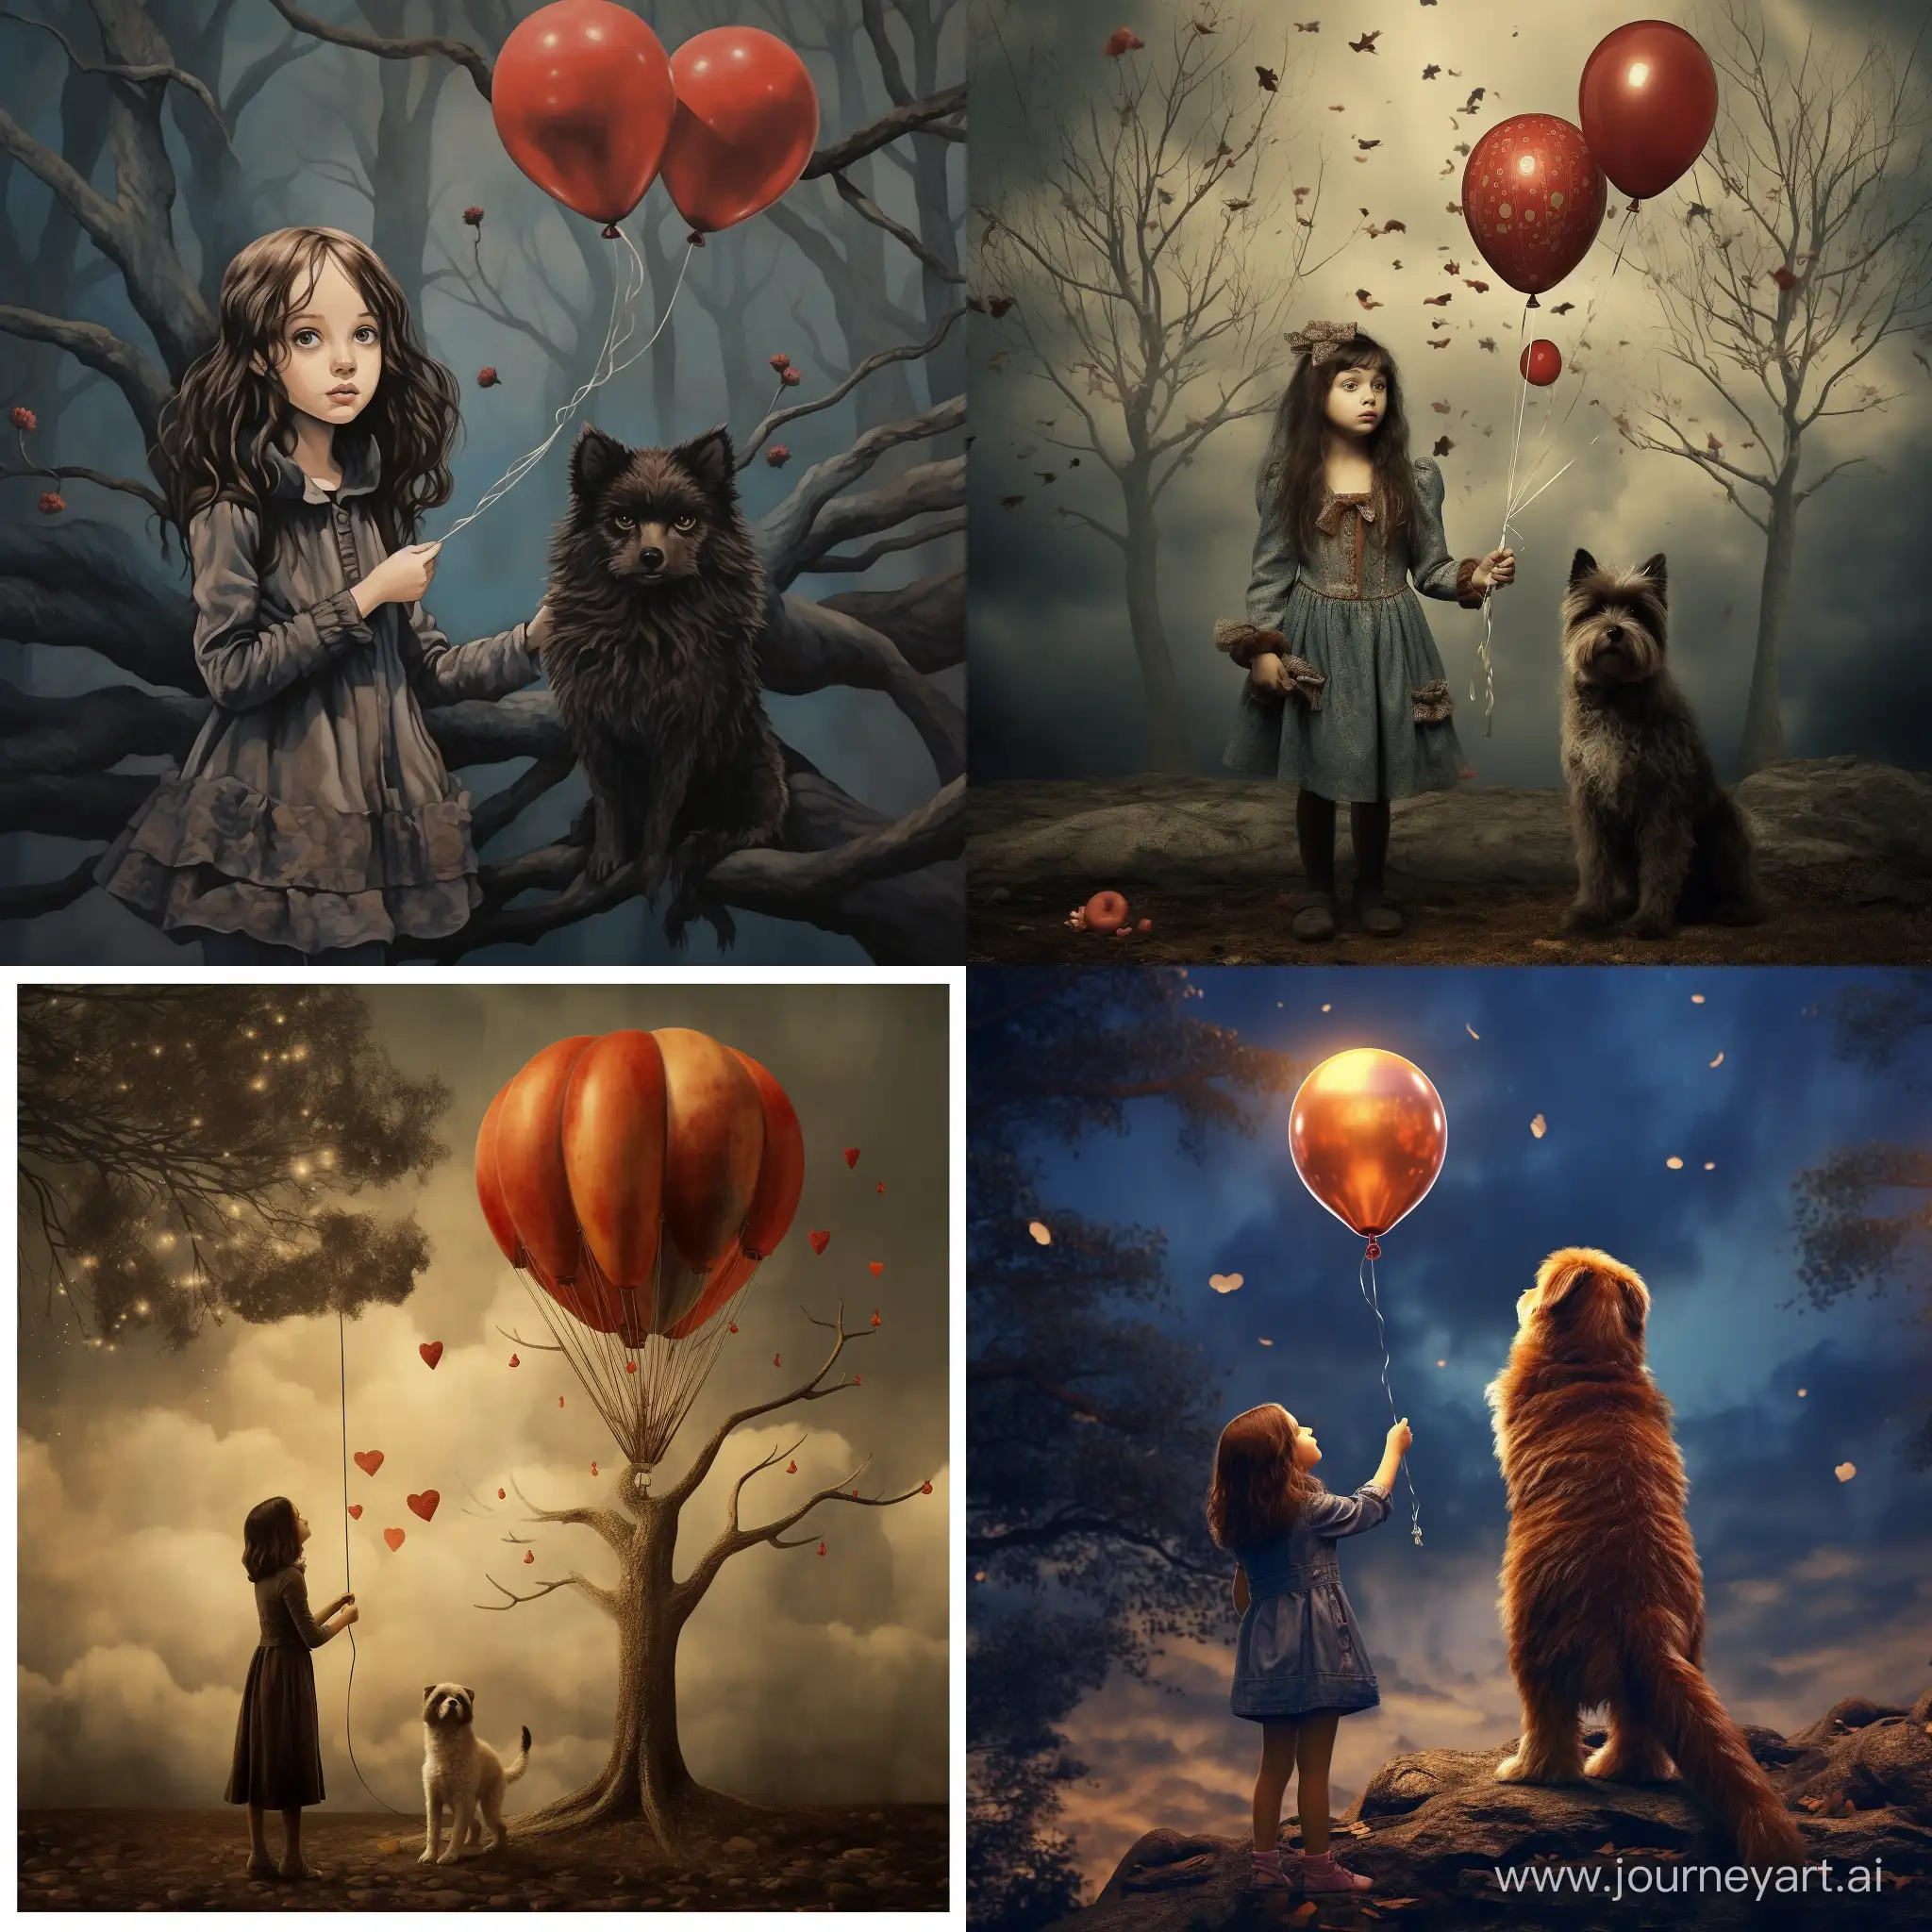 Adventurous-Girl-with-Dog-and-Air-Balloon-by-the-Tree